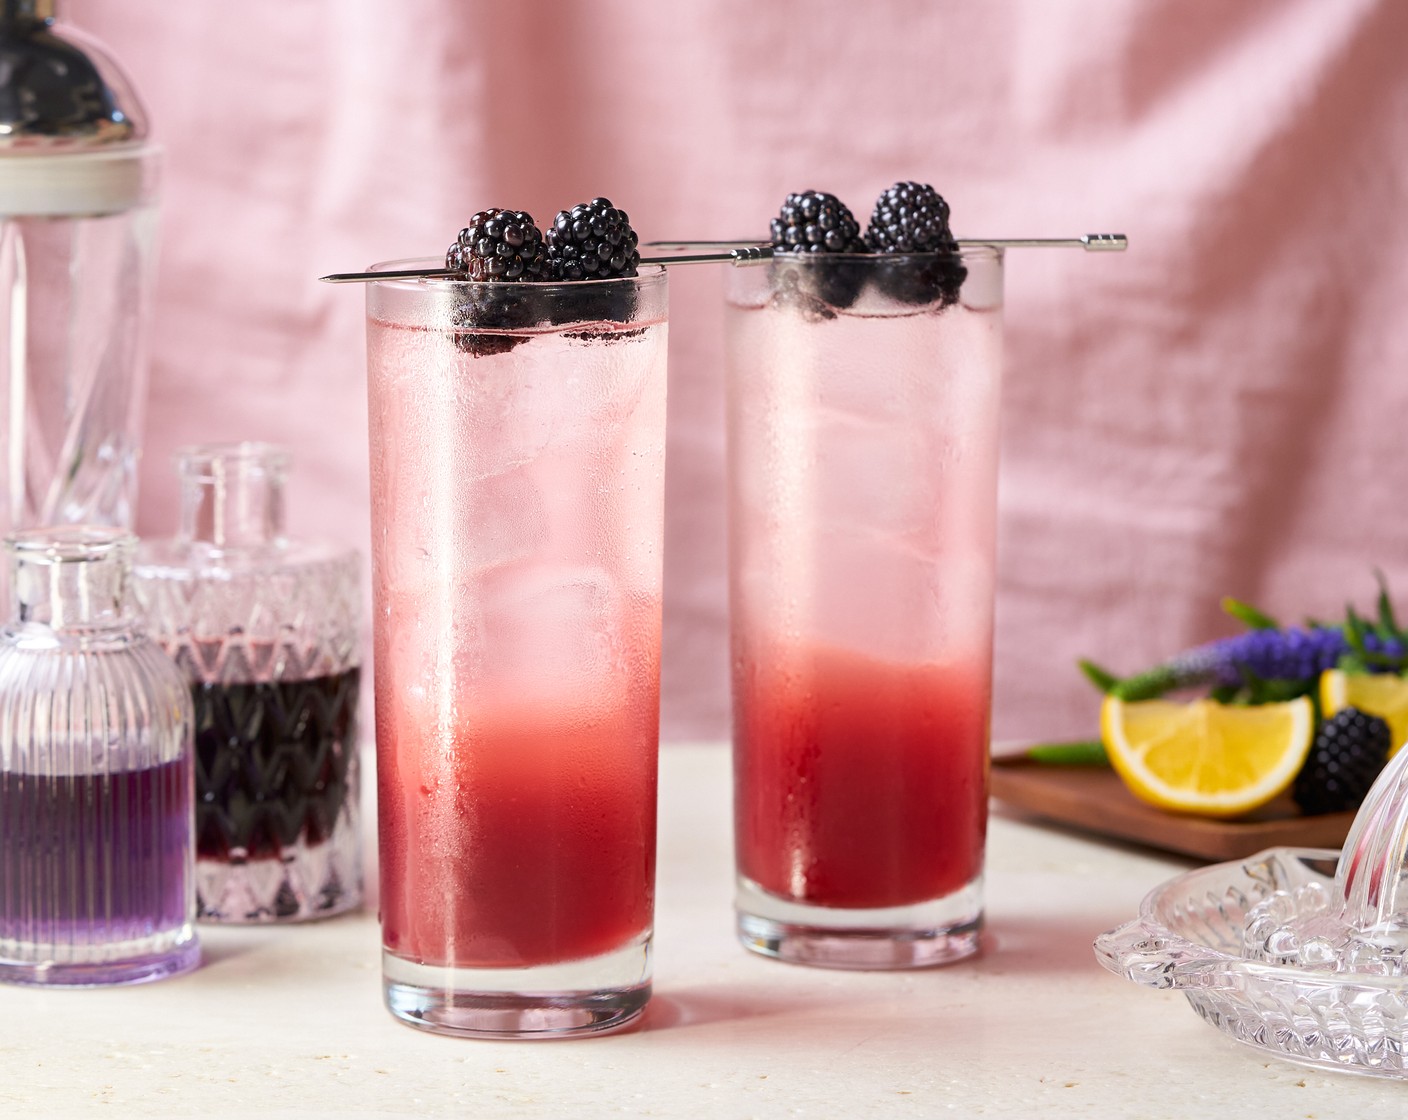 step 4 Top up with Club Soda (as needed), and garnish with Fresh Blackberries (as needed). Serve immediately.